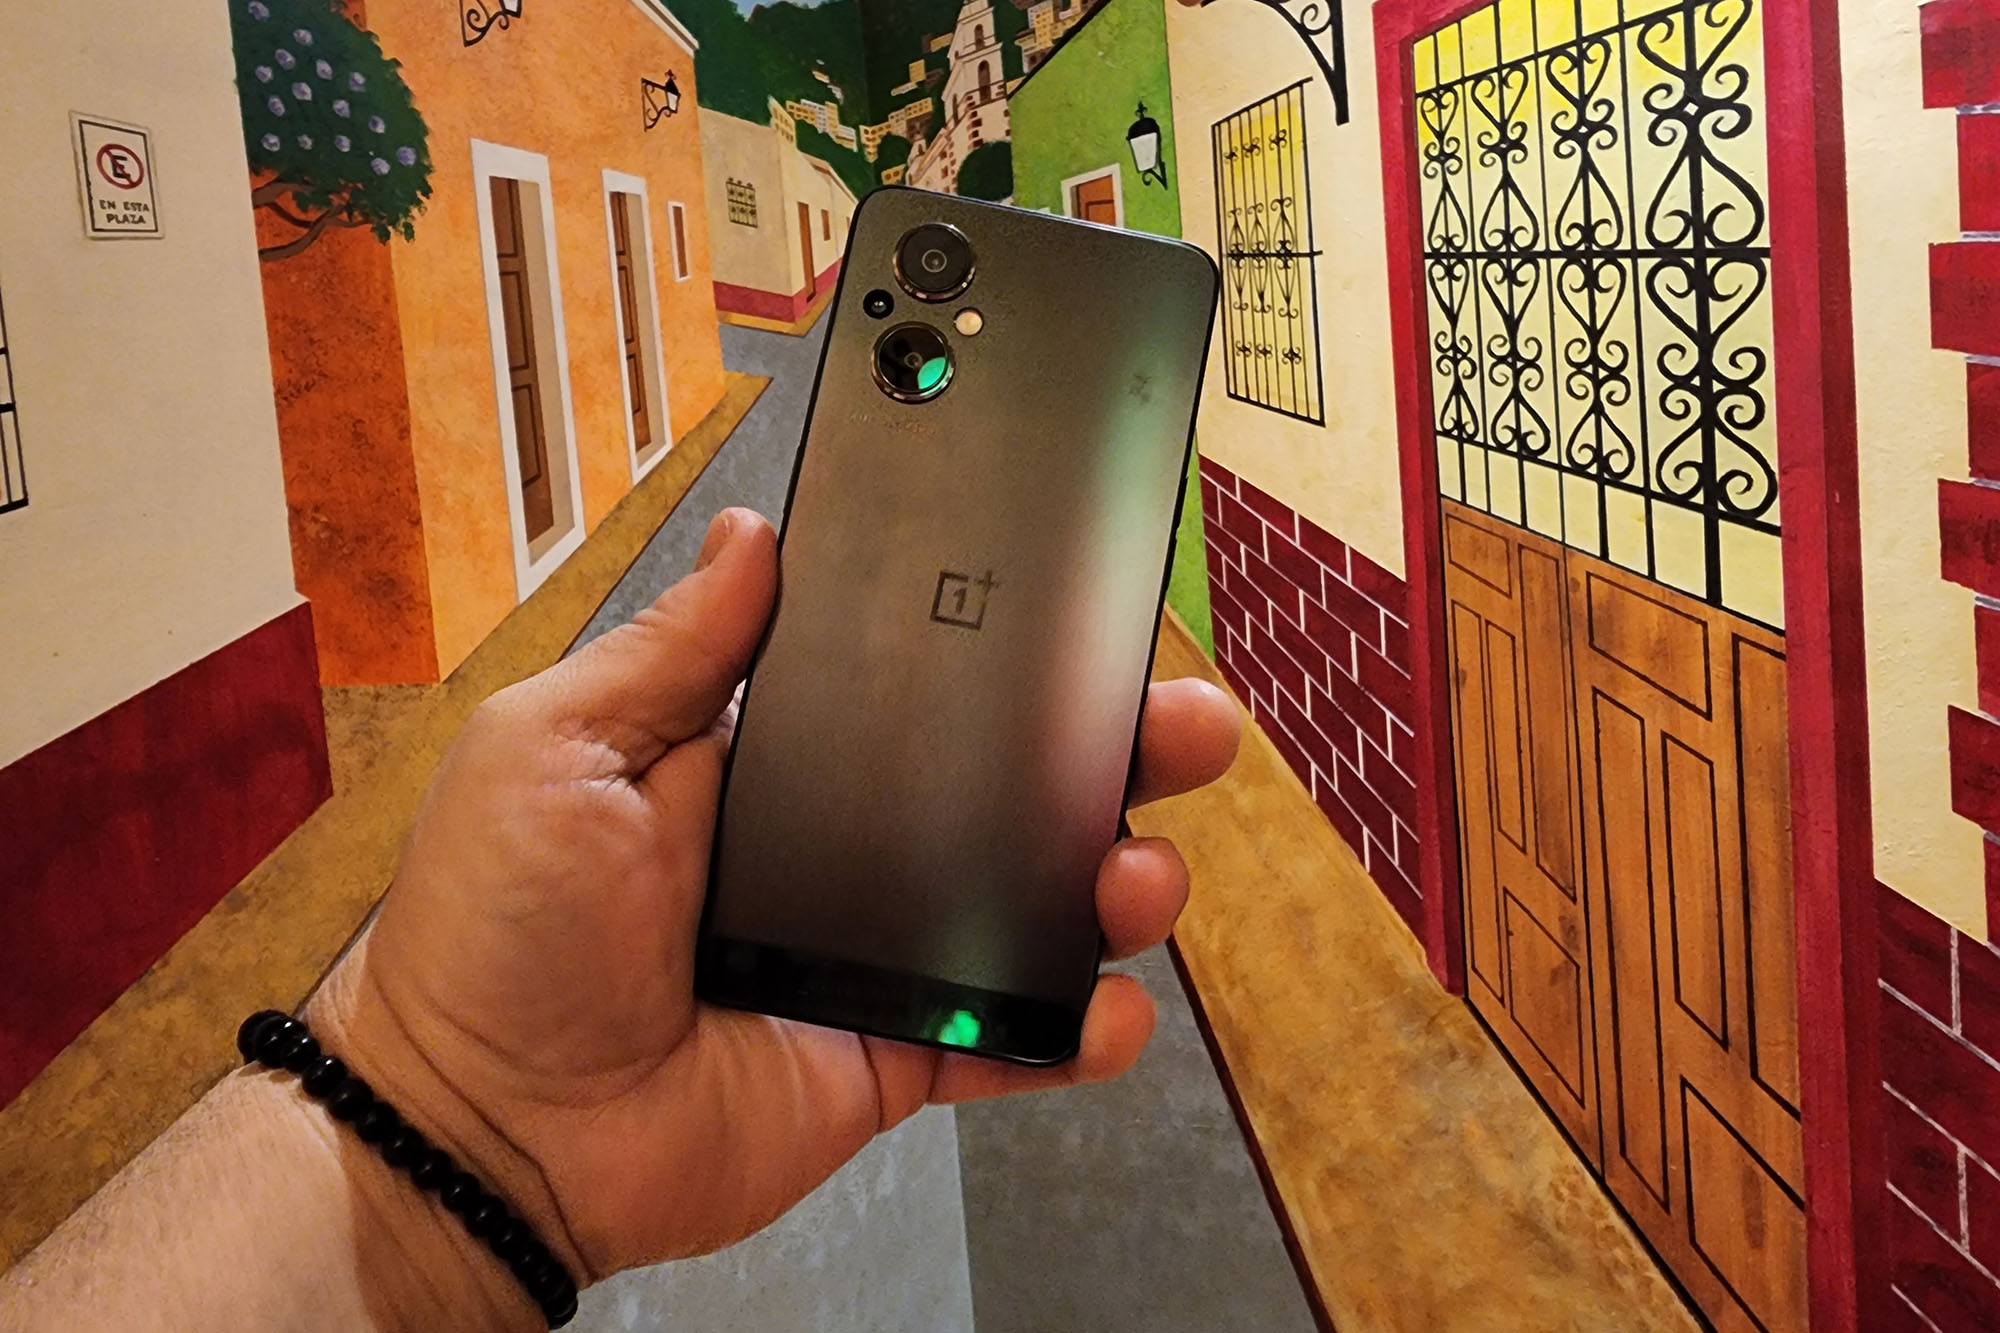 OnePlus Nord N200 5G review: Affordable 5G at a price